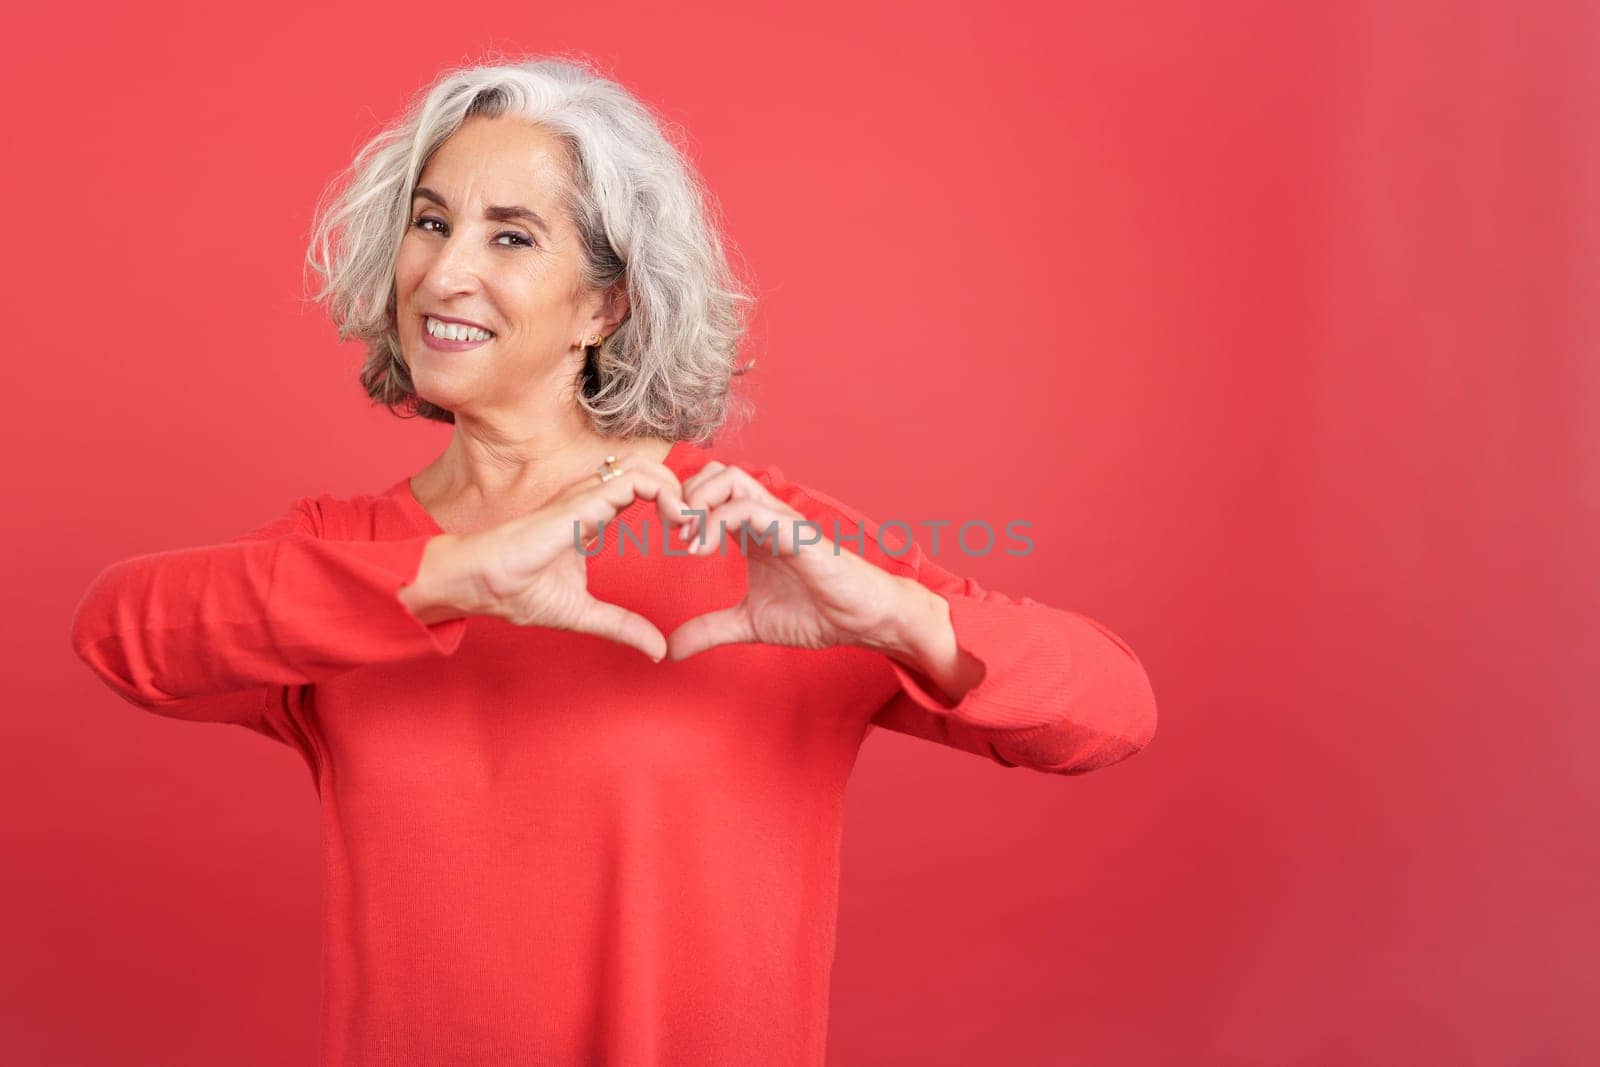 Studio portrait with red background of a mature woman depicting a heart in the shape of her fingers